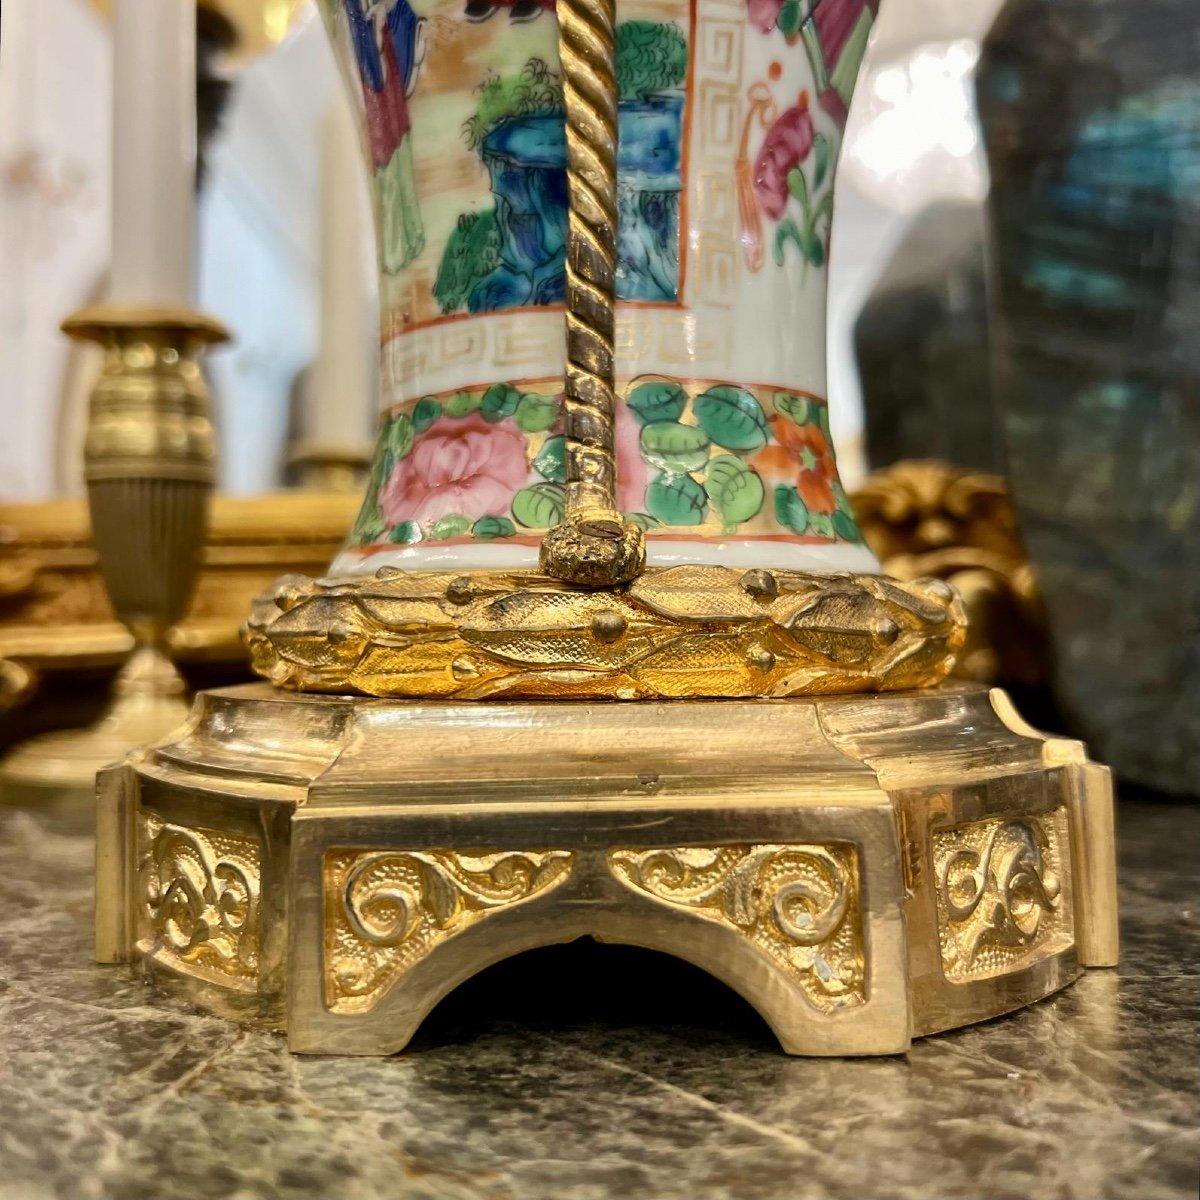 French 19th Century Canton Porcelain Vase Mounted on Gilt Bronze  For Sale